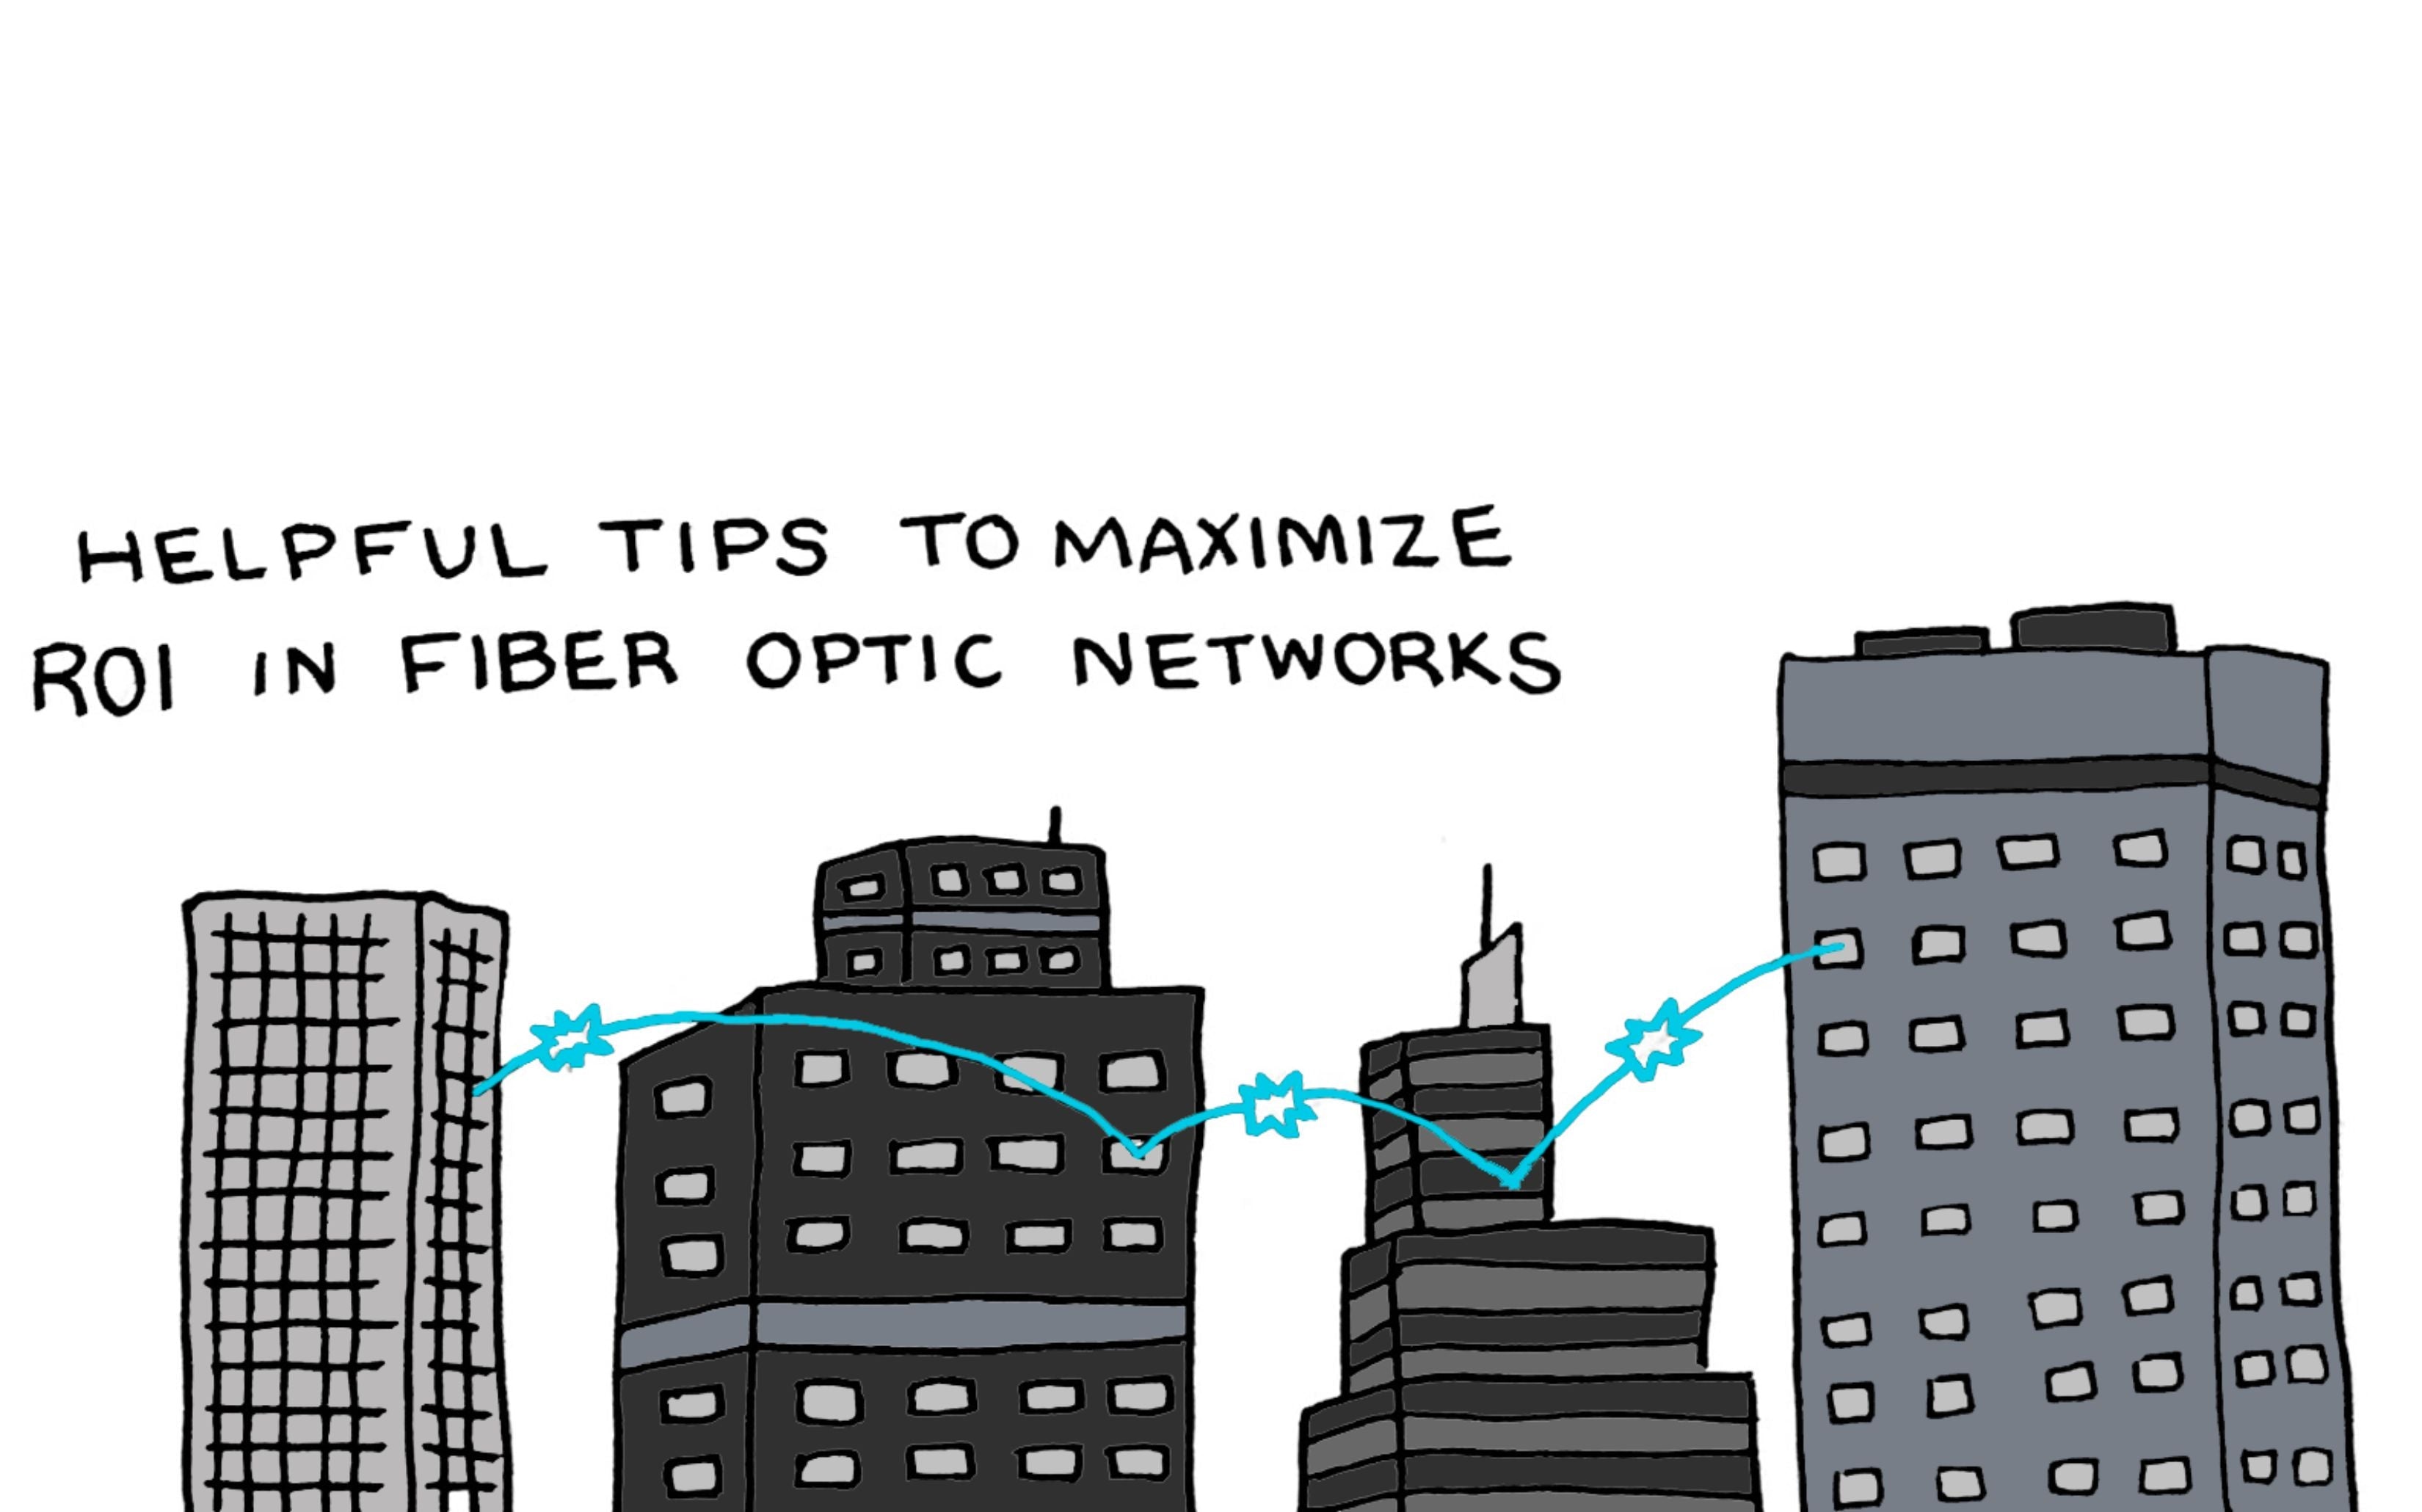 Helpful Tips to Maximize ROI in Fiber Optic Networks